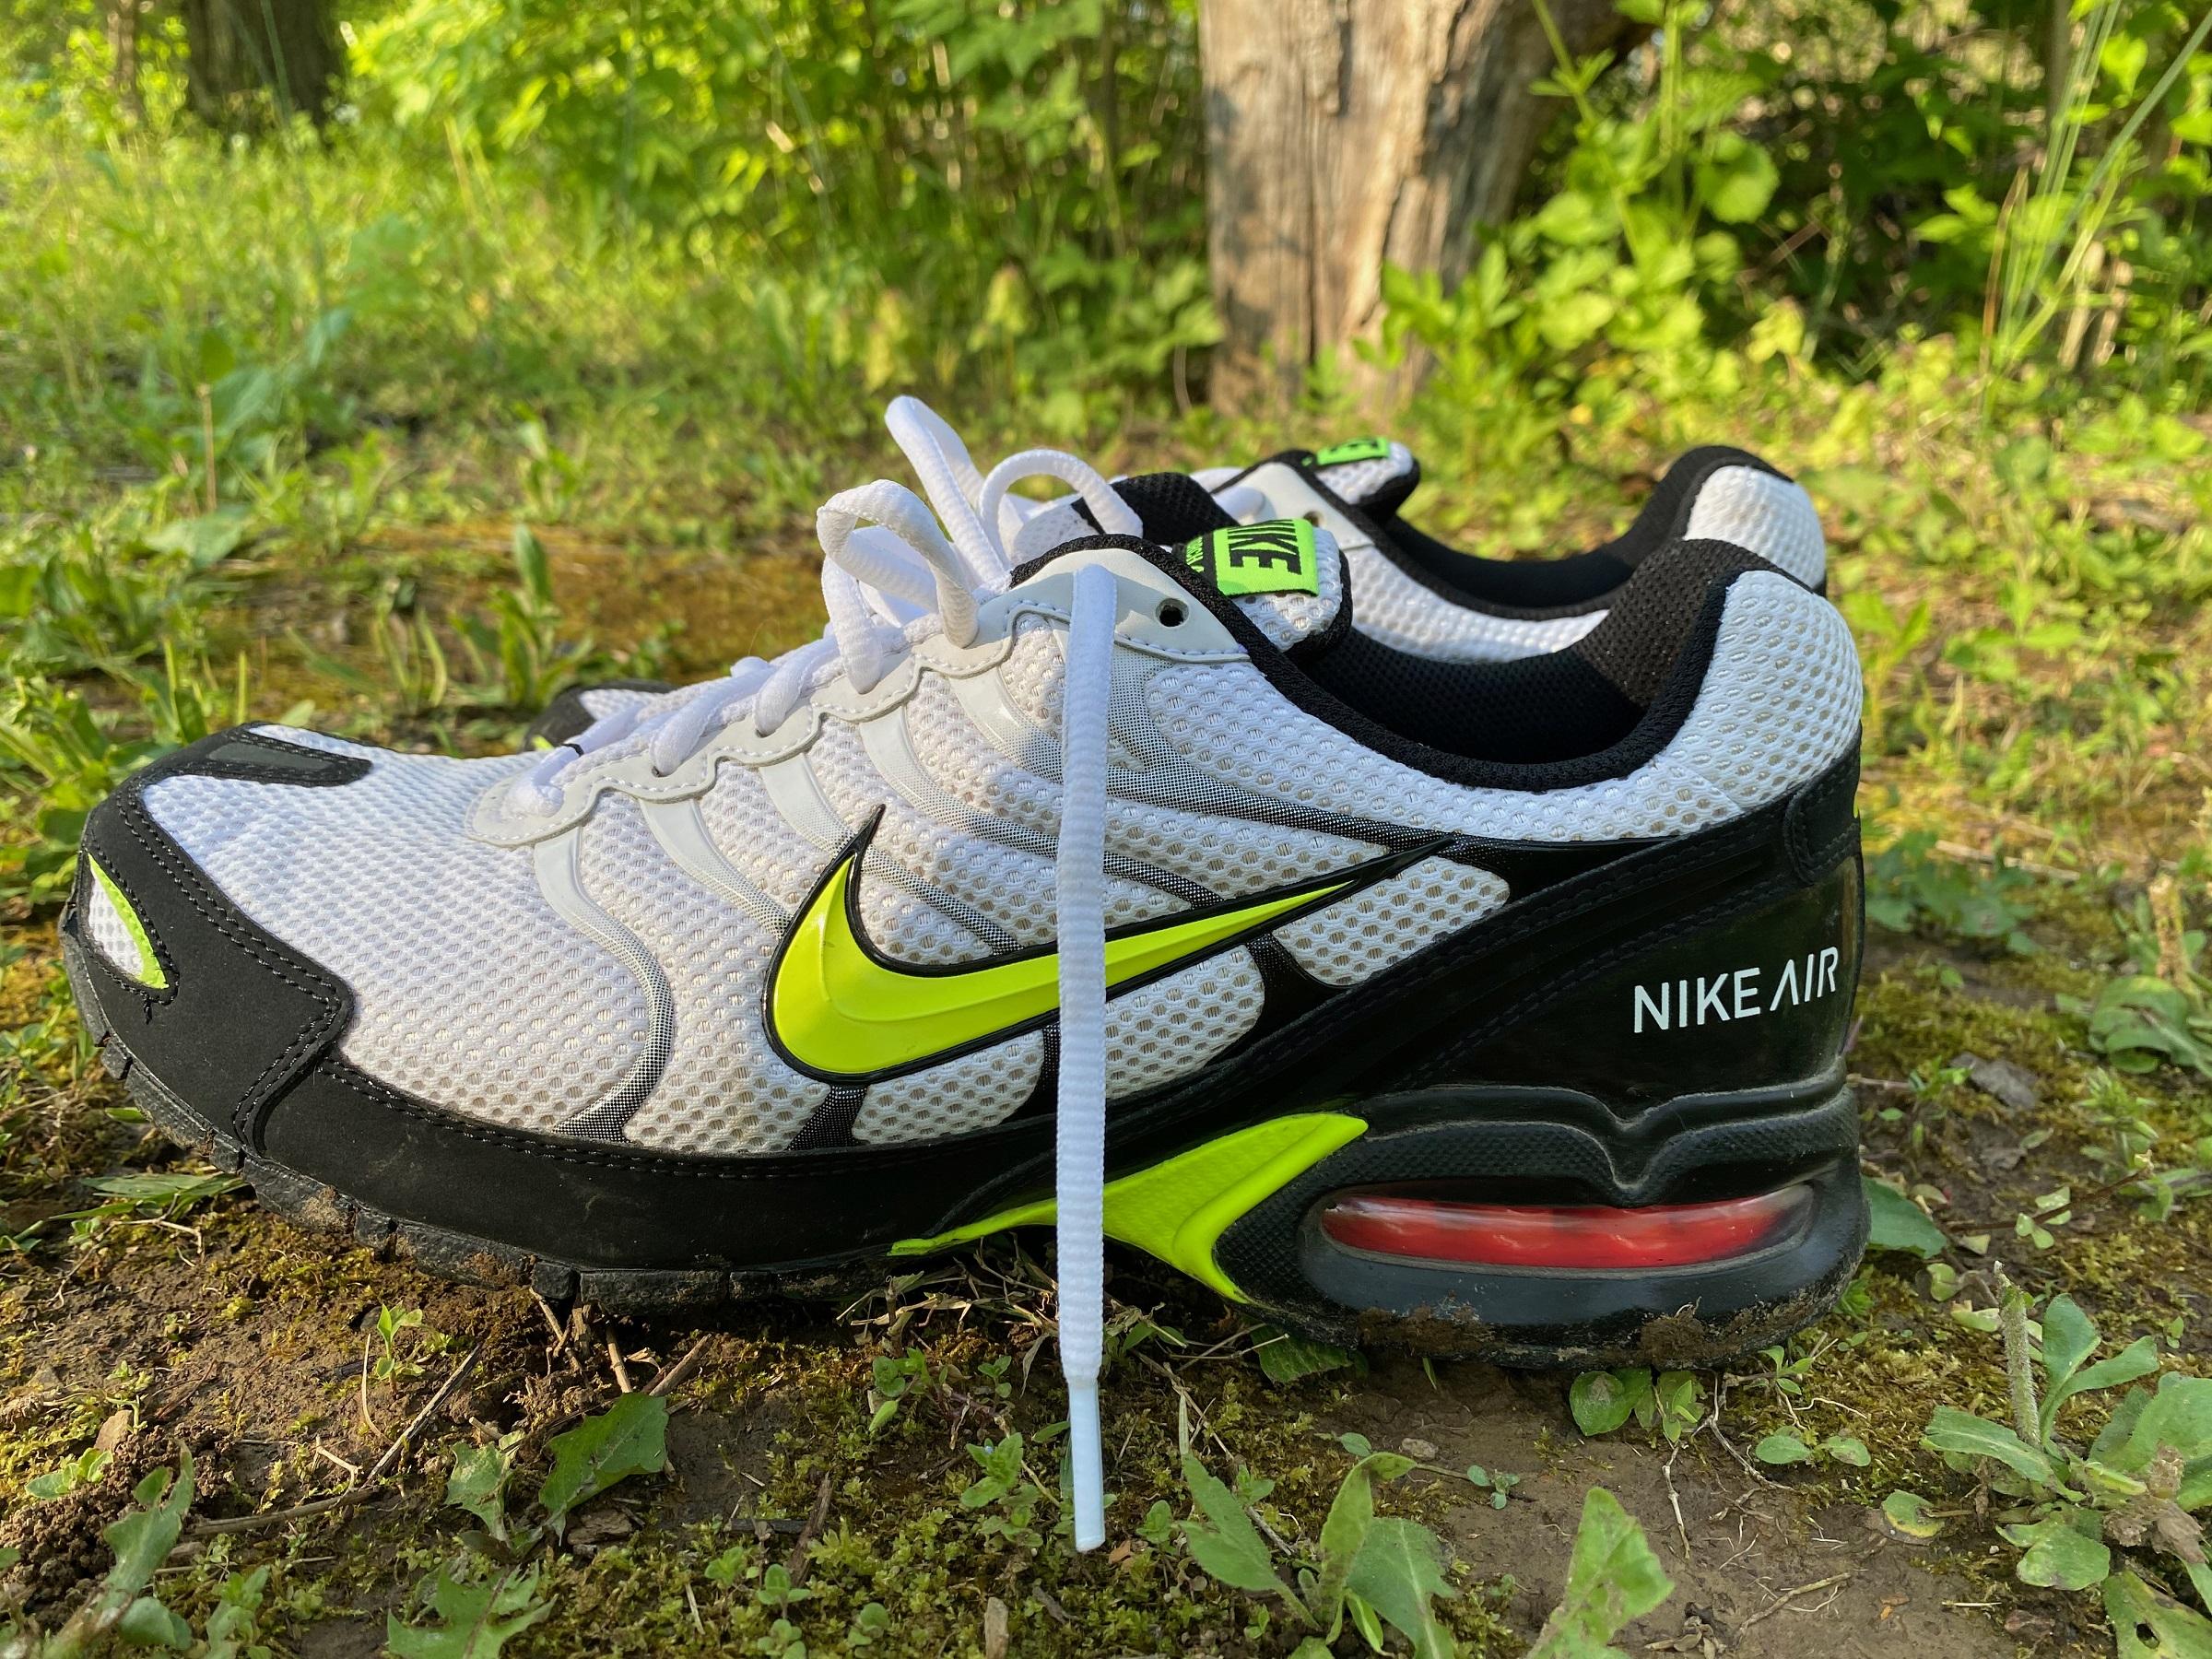 Nike Air Max Torch 4 Review, Facts, Comparison | RunRepeat